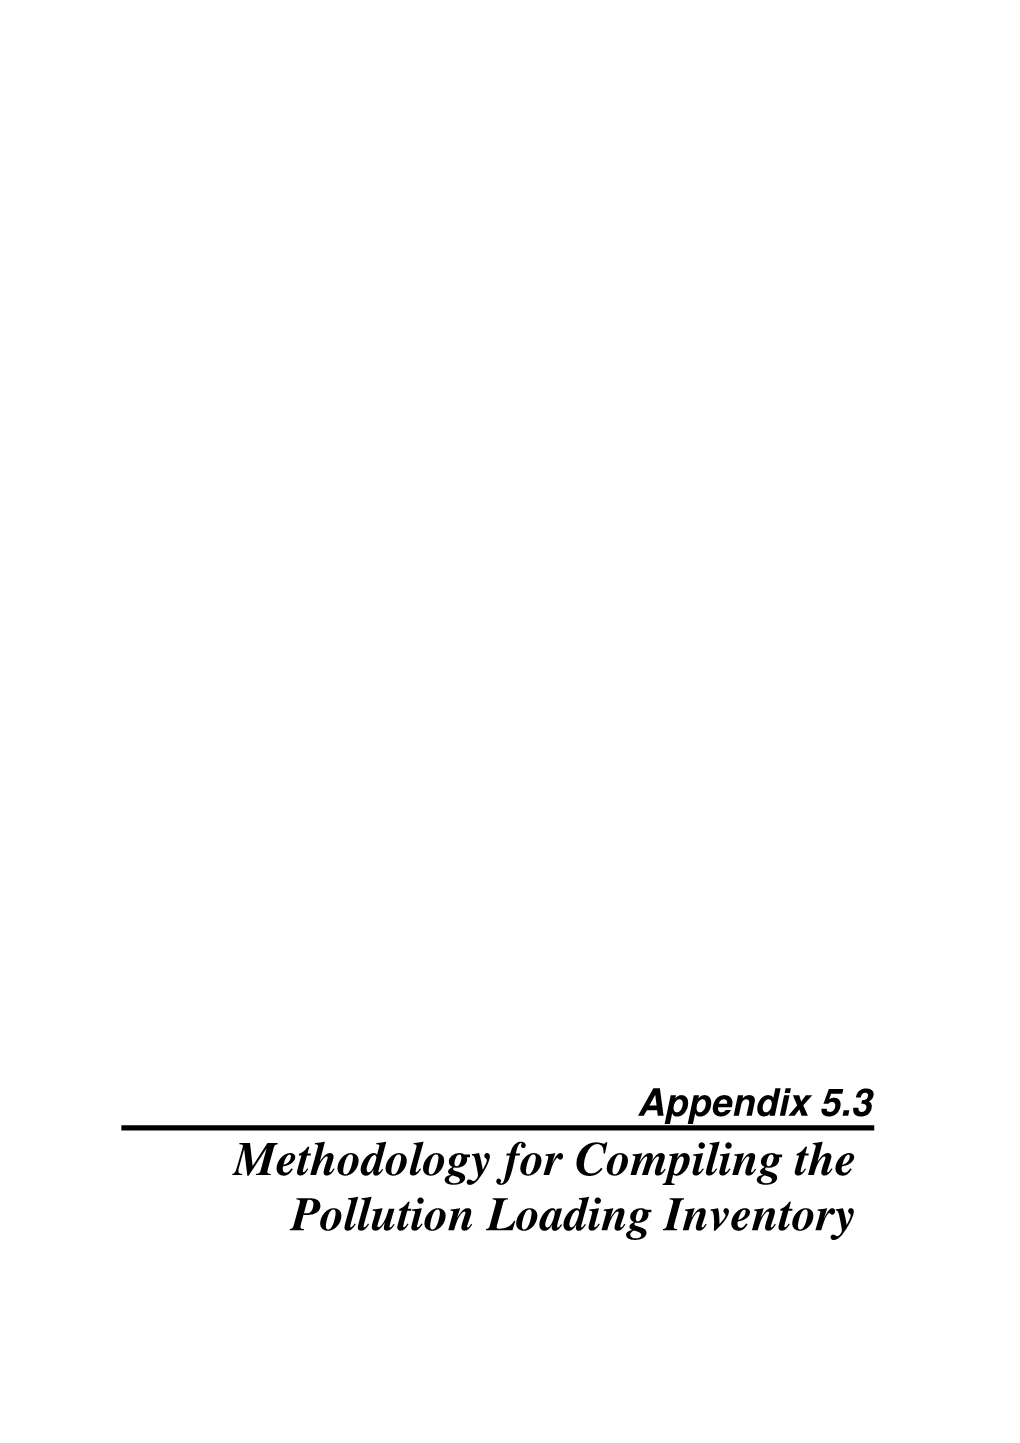 Appendix 5.3 Methodology for Compiling the Pollution Loading Inventory Appendix 5.3 Methodology for Compiling the Pollution Loading Inventory